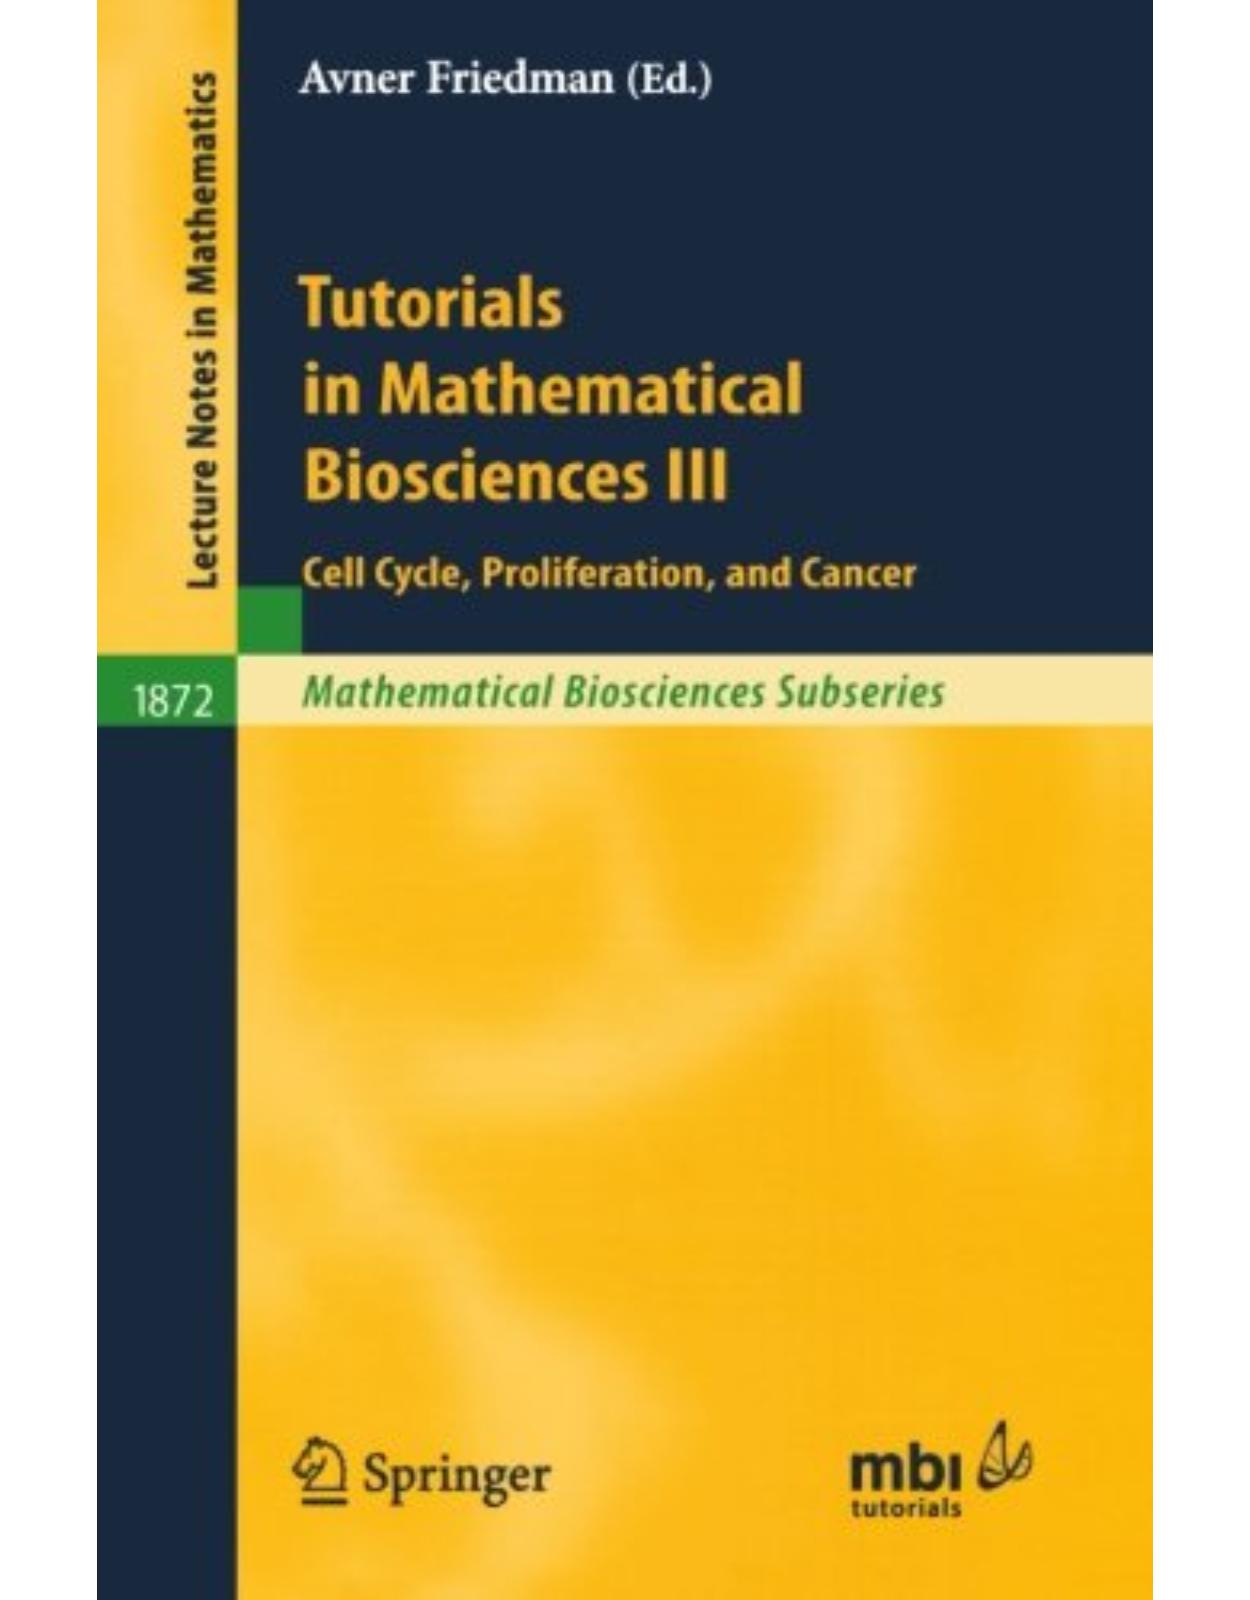 Tutorials in Mathematical Biosciences III: Cell Cycle, Proliferation, and Cancer (Lecture Notes in Mathematics / Mathematical Biosciences Subseries) 